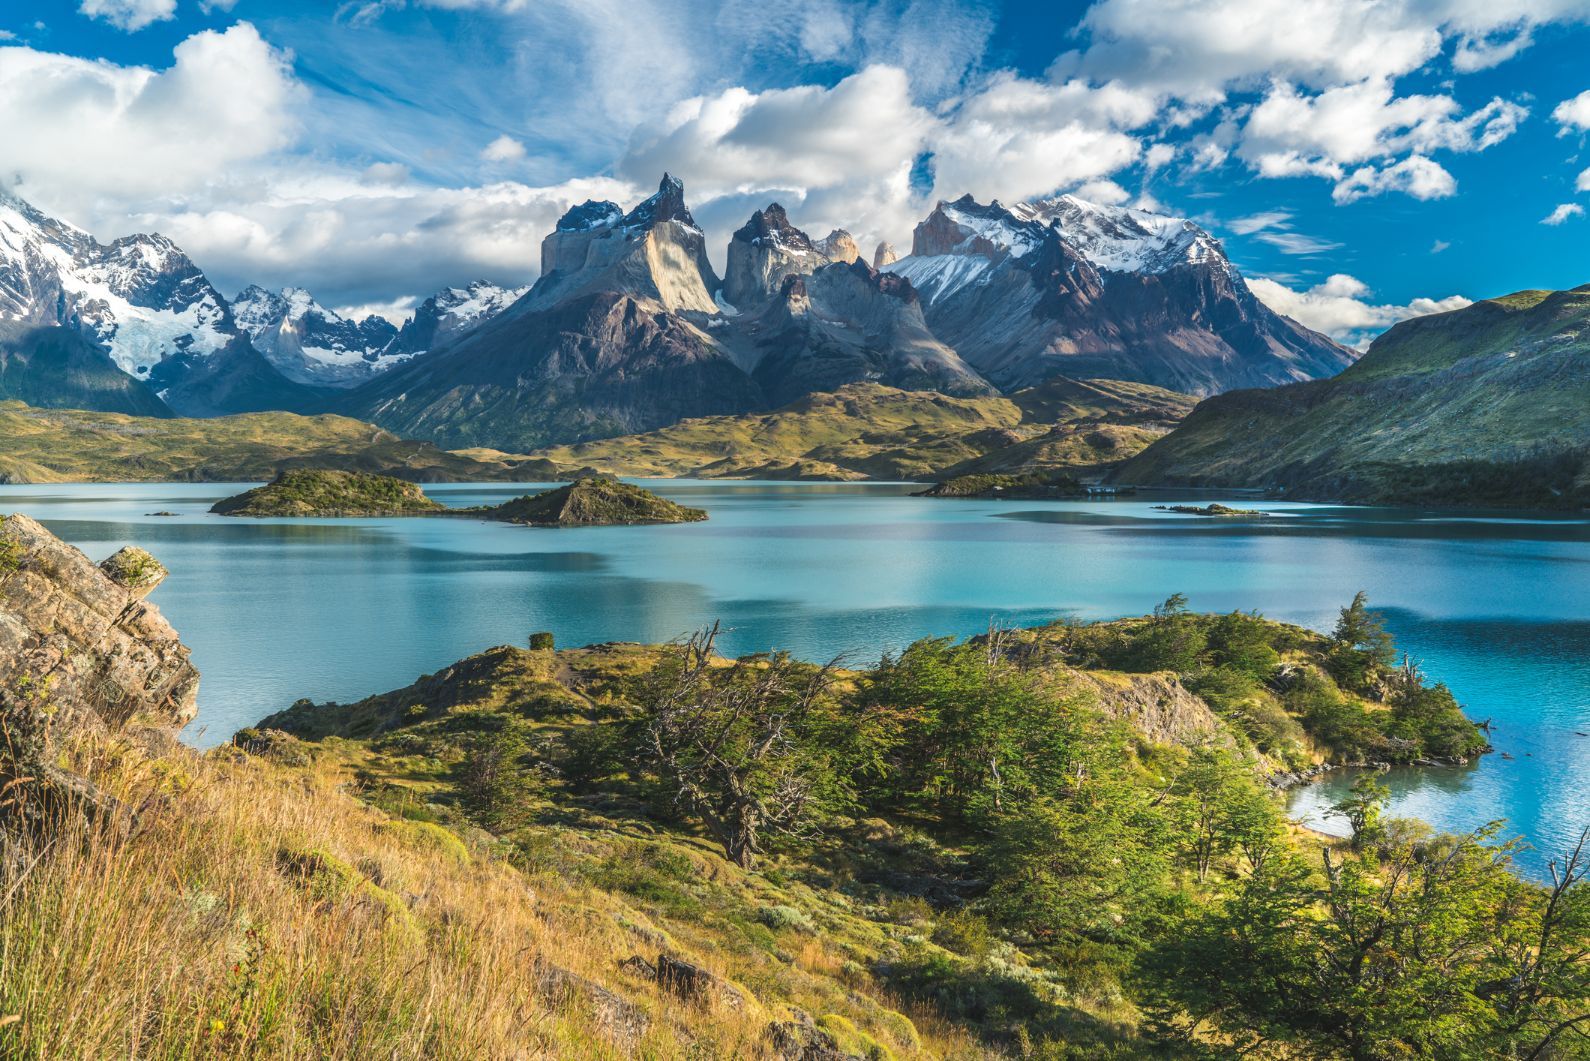 Trekking in Patagonia and Torres del Paine national park